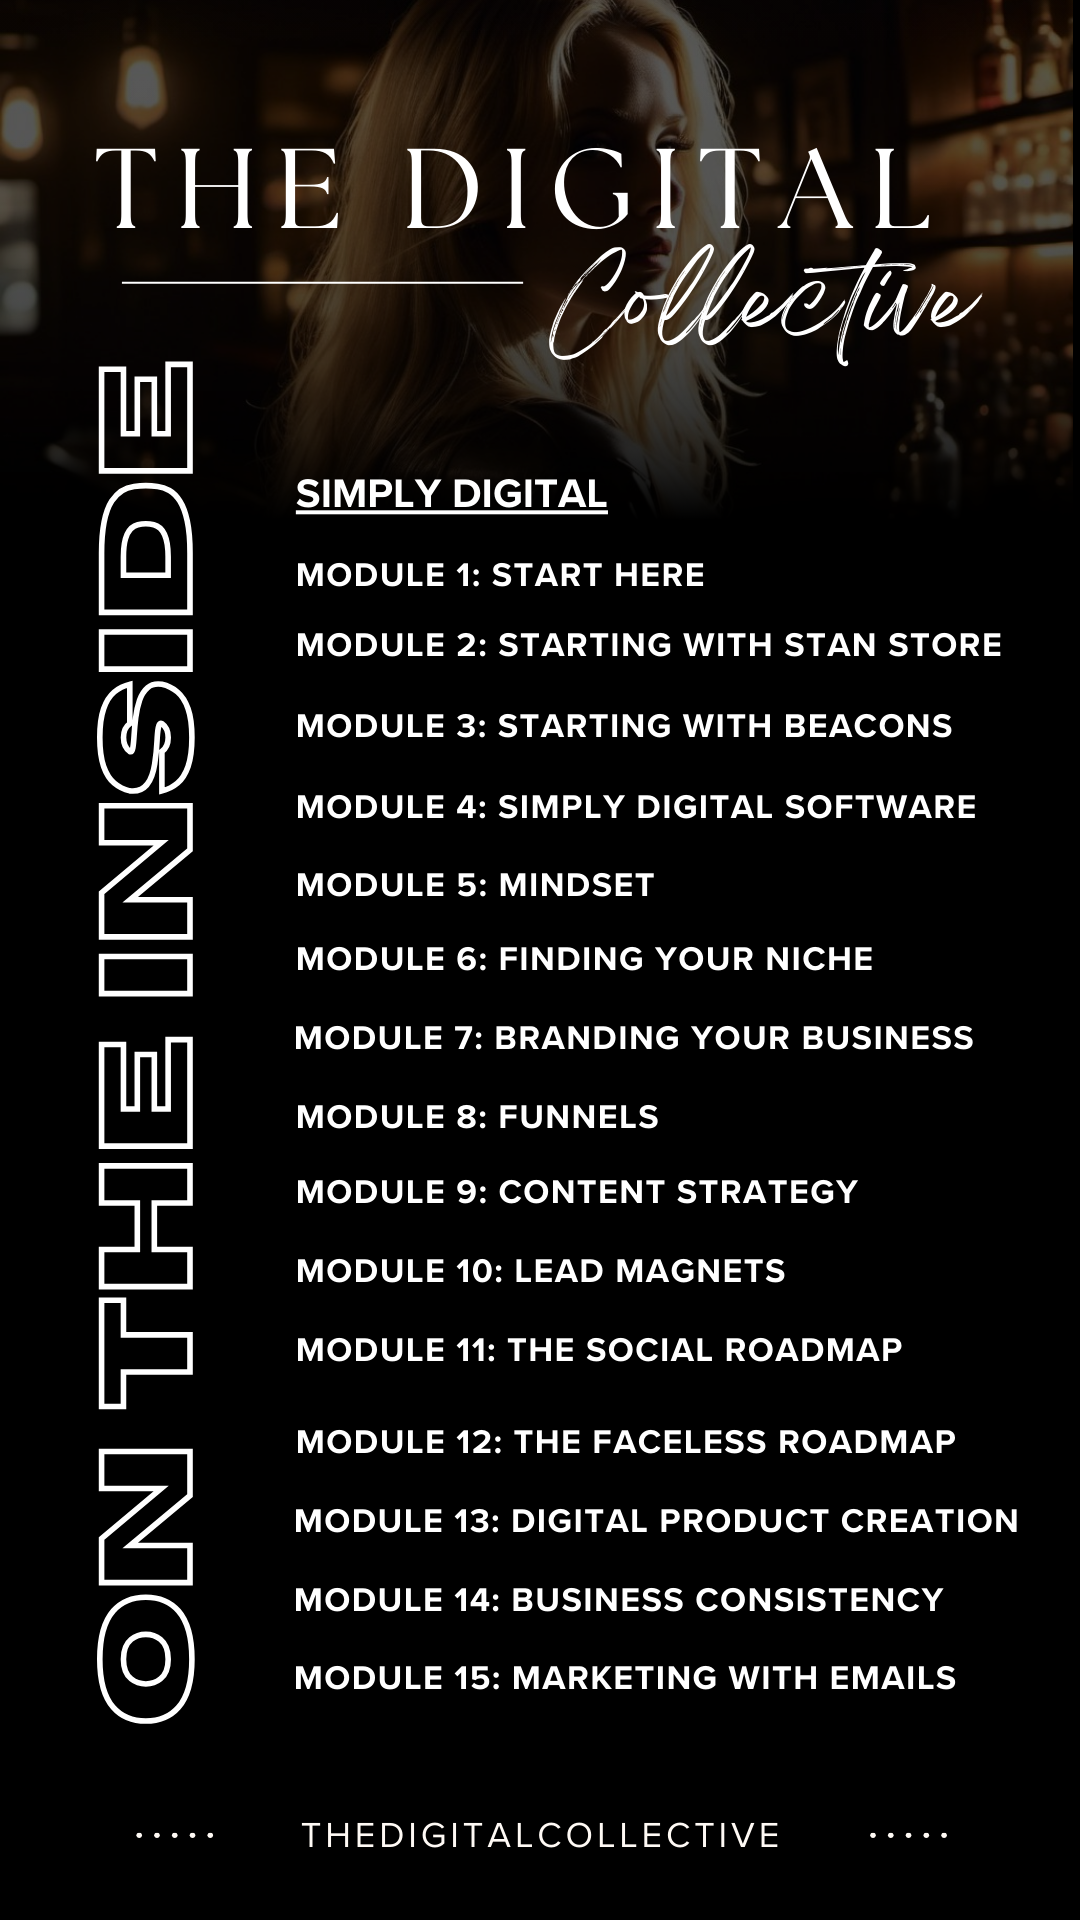 simply digital course modules what is inside